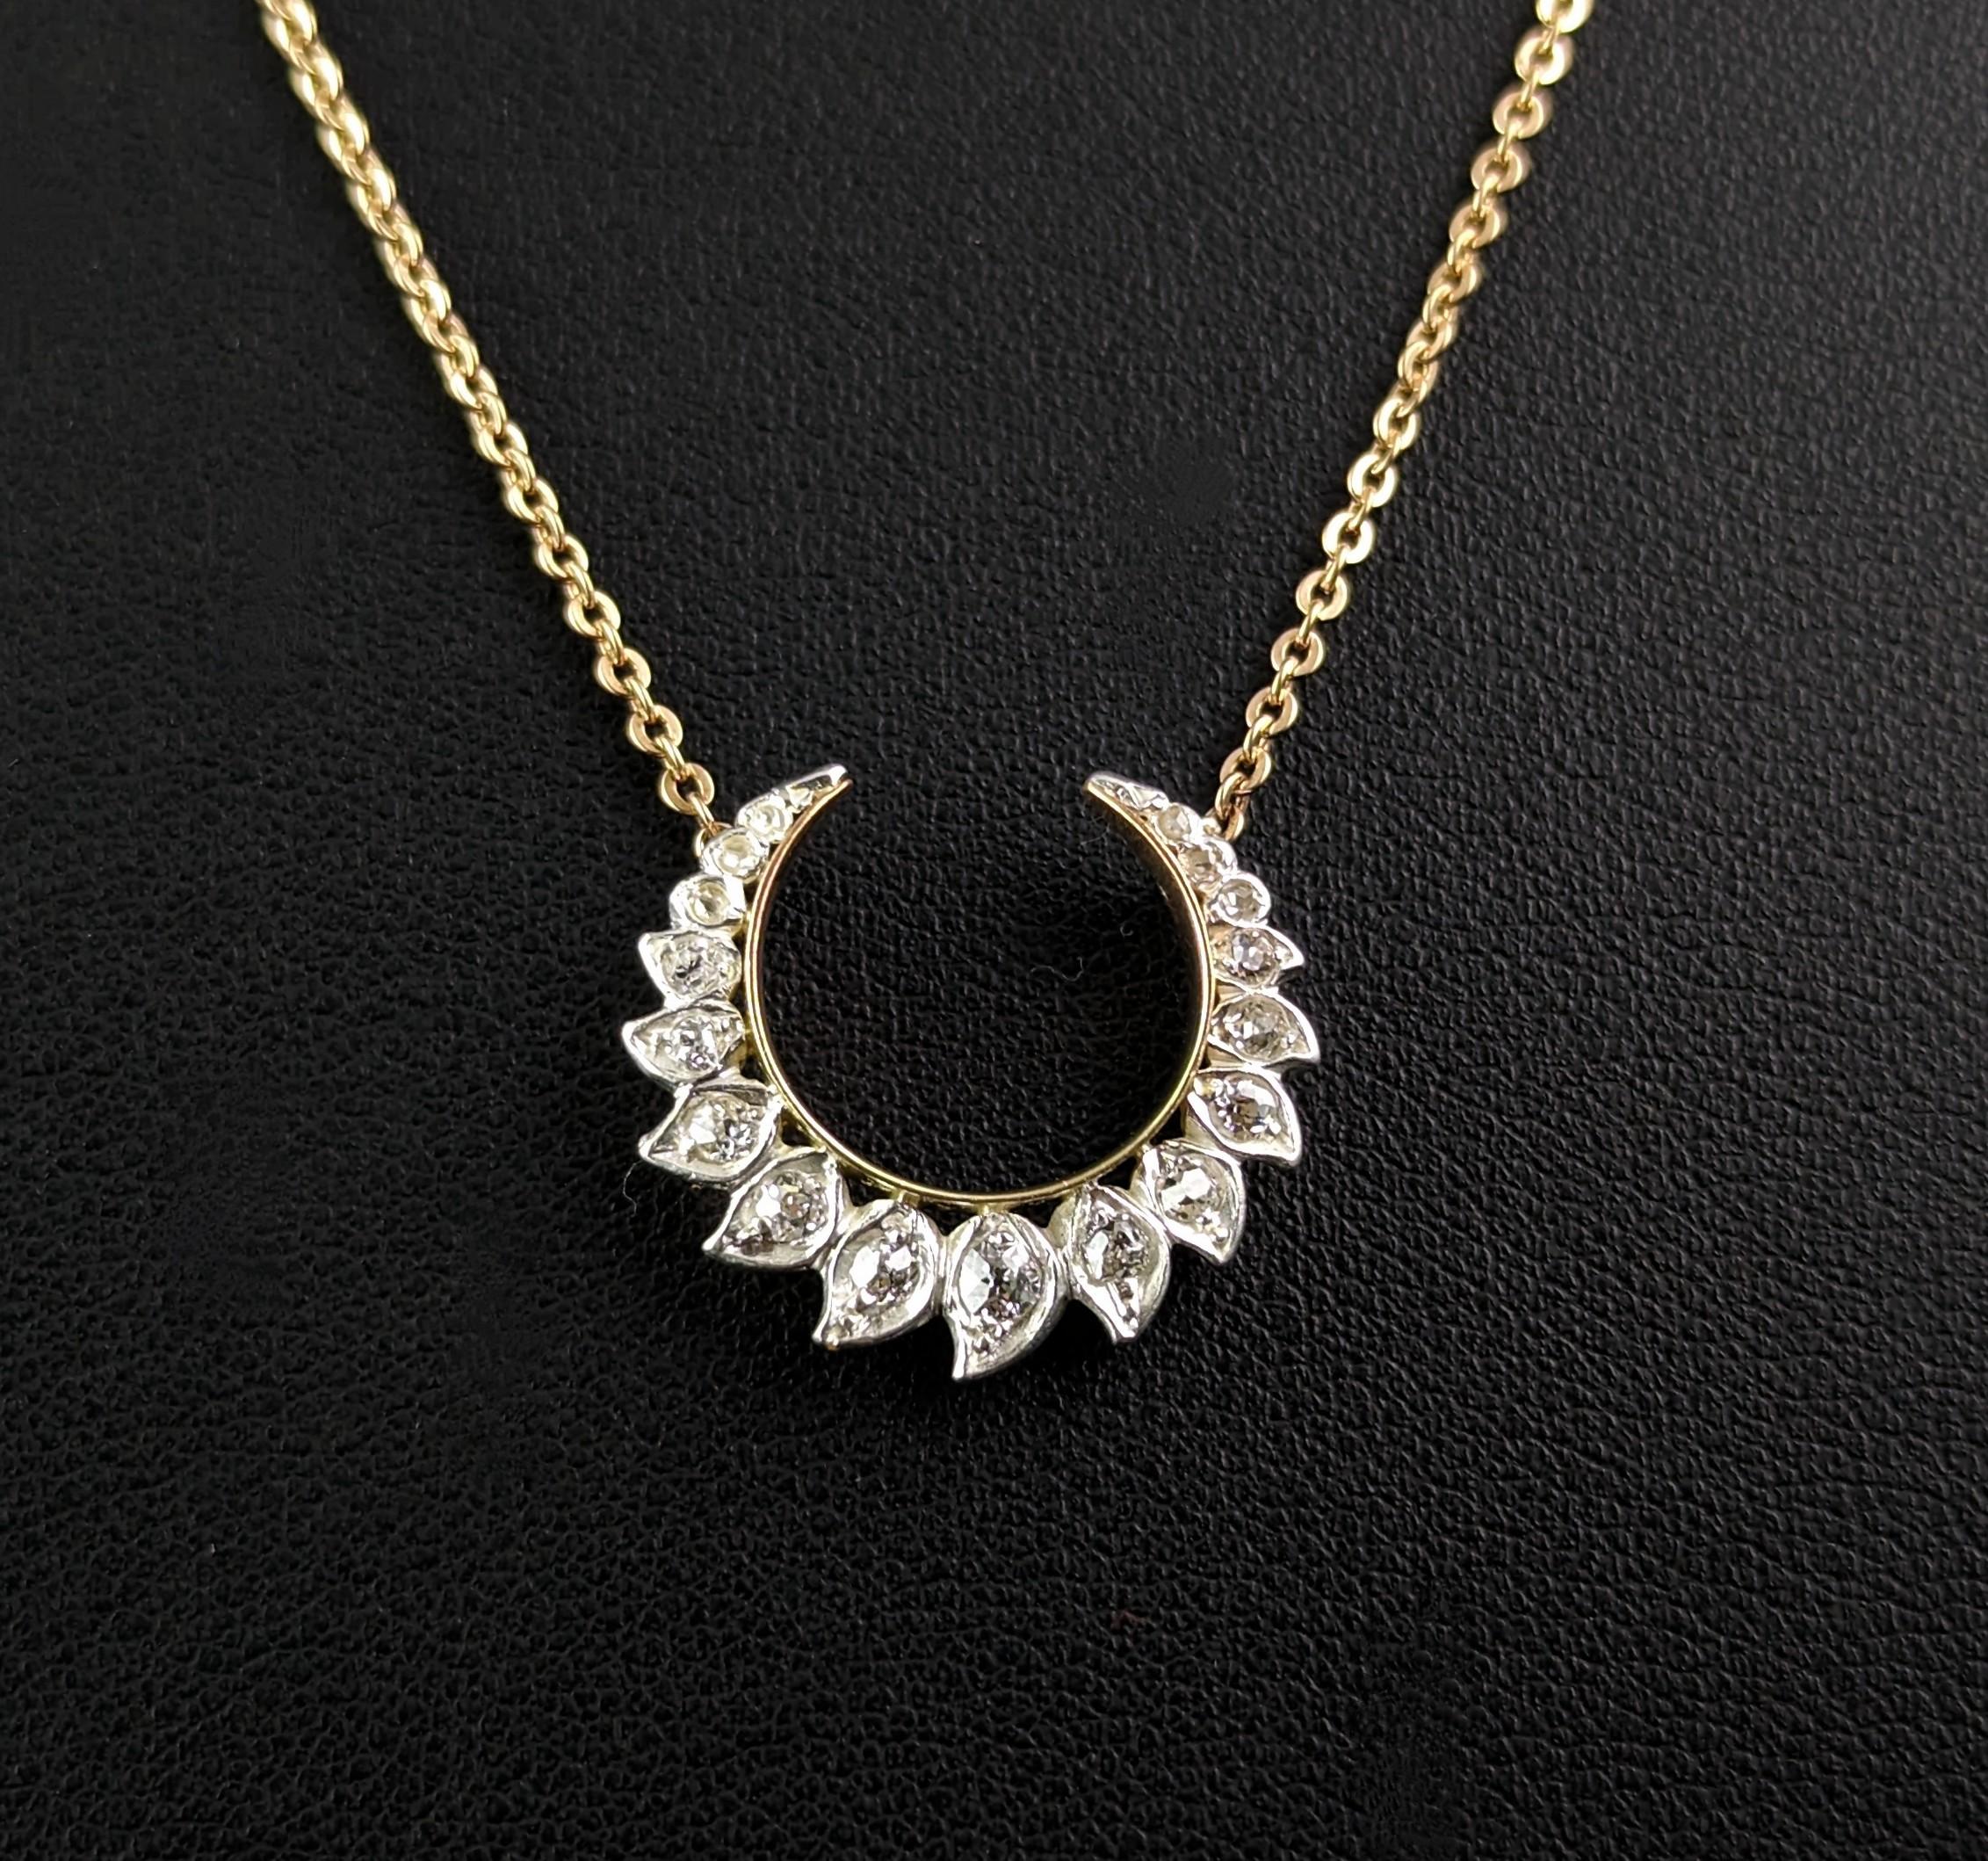 You cannot help but fall in love with this beautiful antique diamond Crescent moon pendant necklace.

This is a conversion piece, the Crescent was originally part of a bar brooch and it has been turned into a pendant necklace along with this pretty